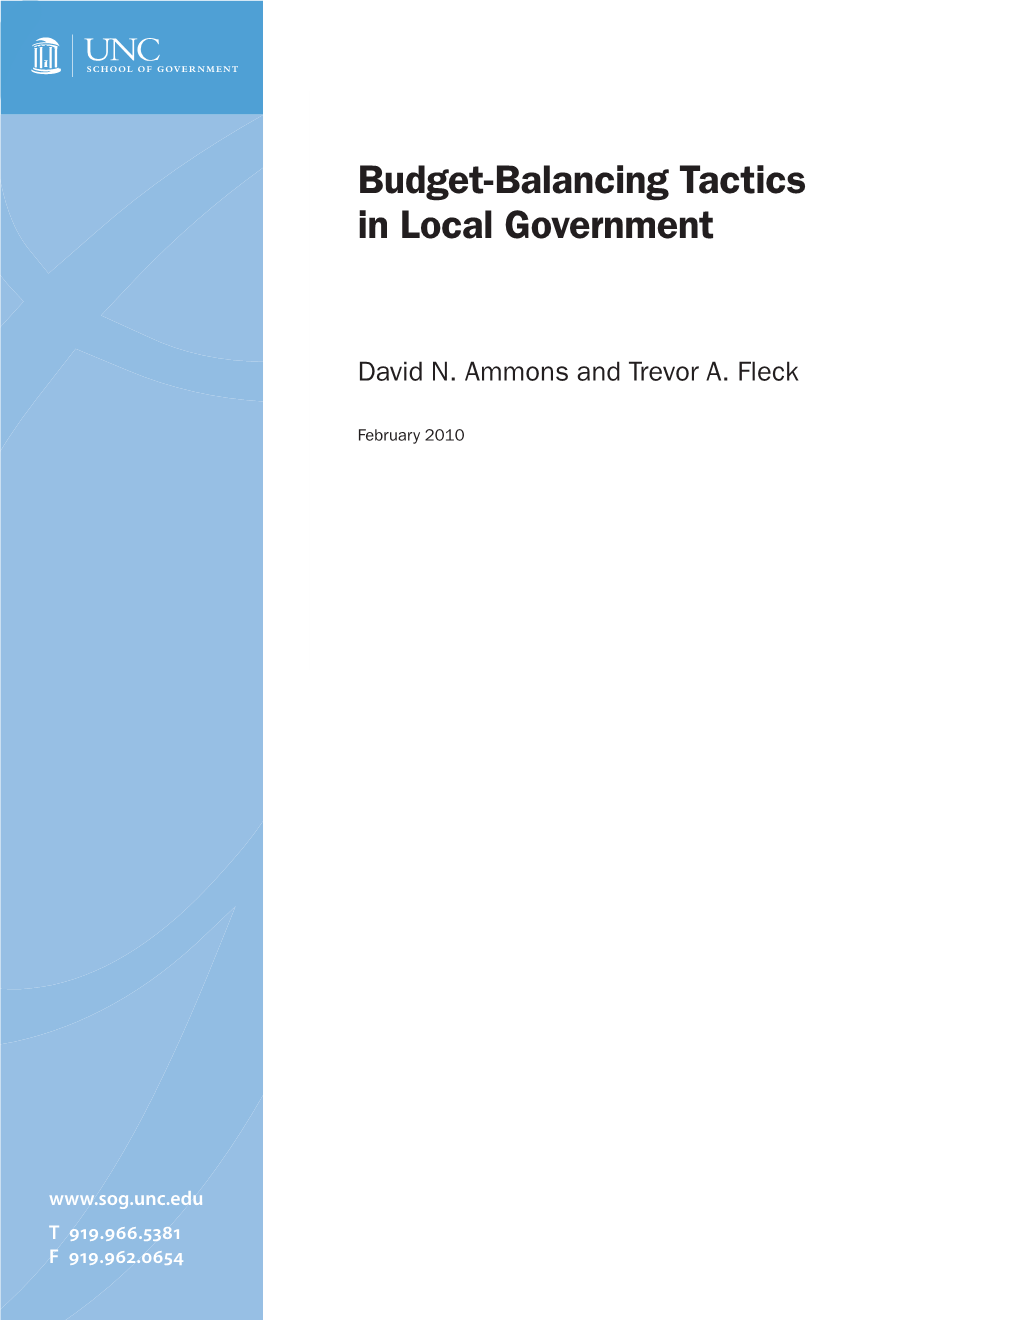 Budget-Balancing Tactics in Local Government